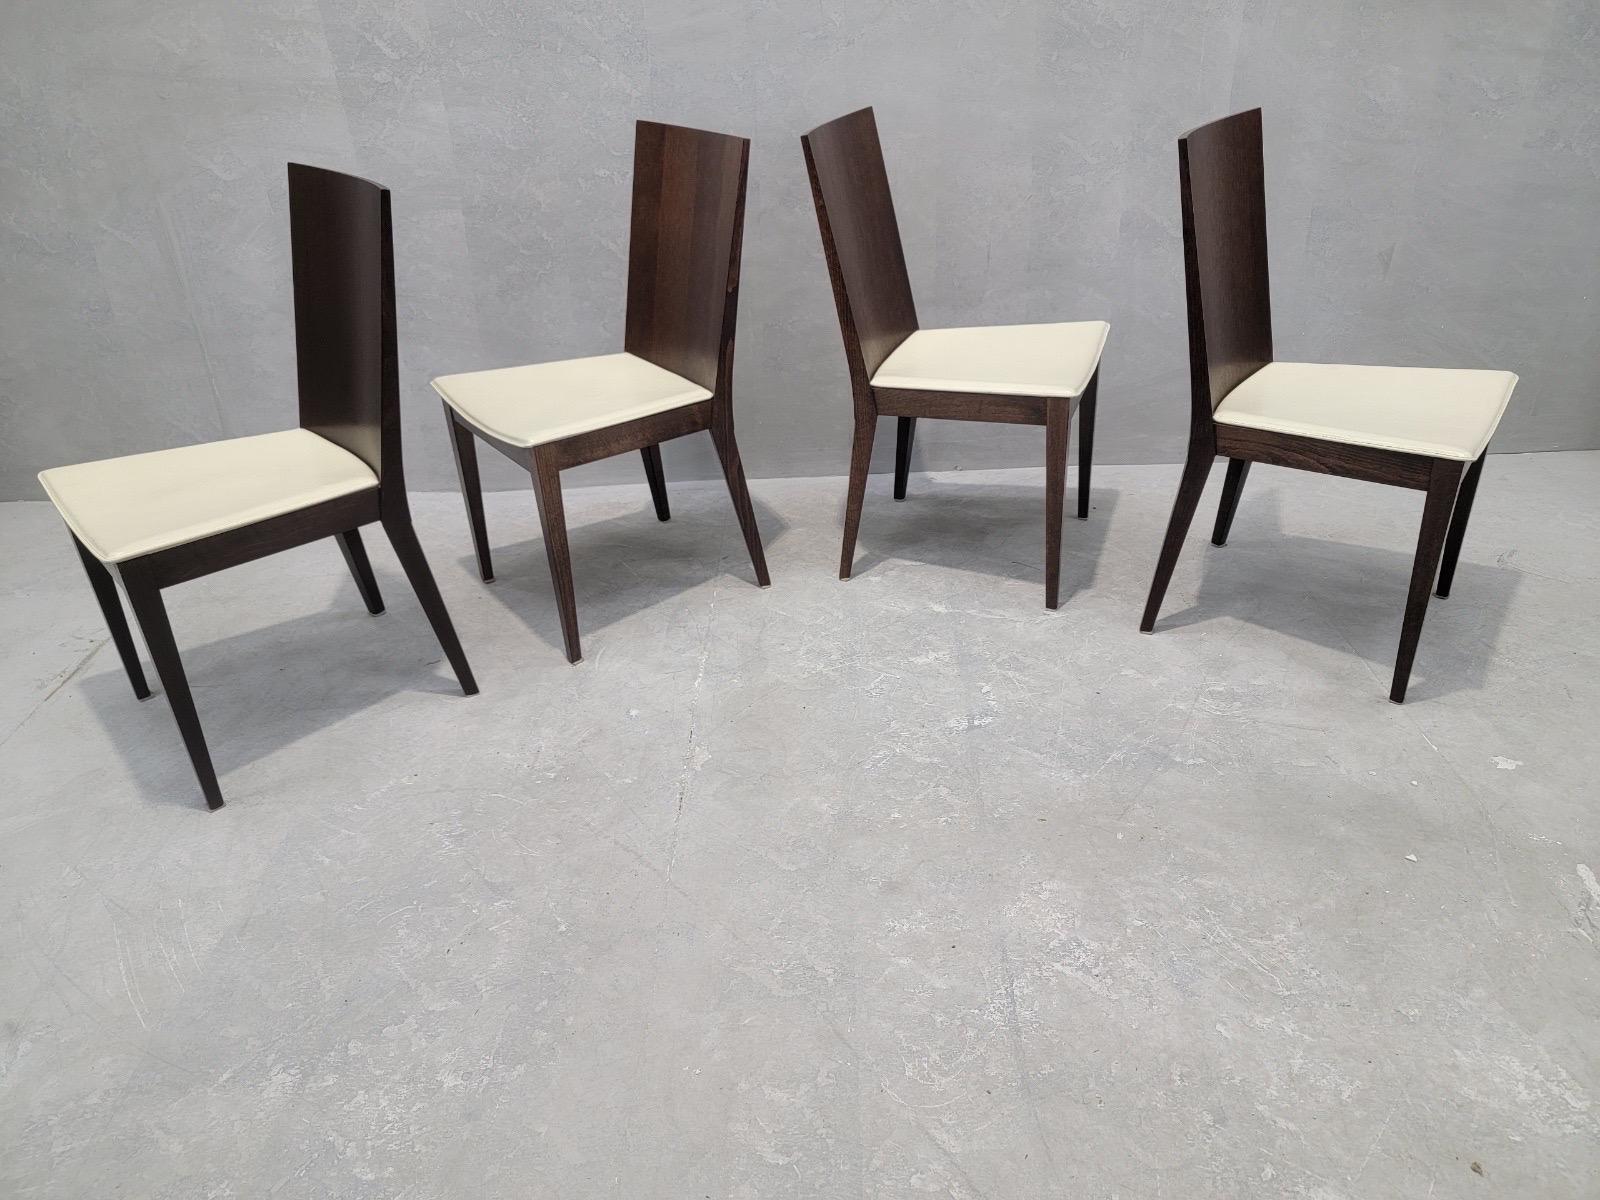 Postmodern Italian Walnut & Leather Dining Chairs by Calligaris - Set of 6 For Sale 1